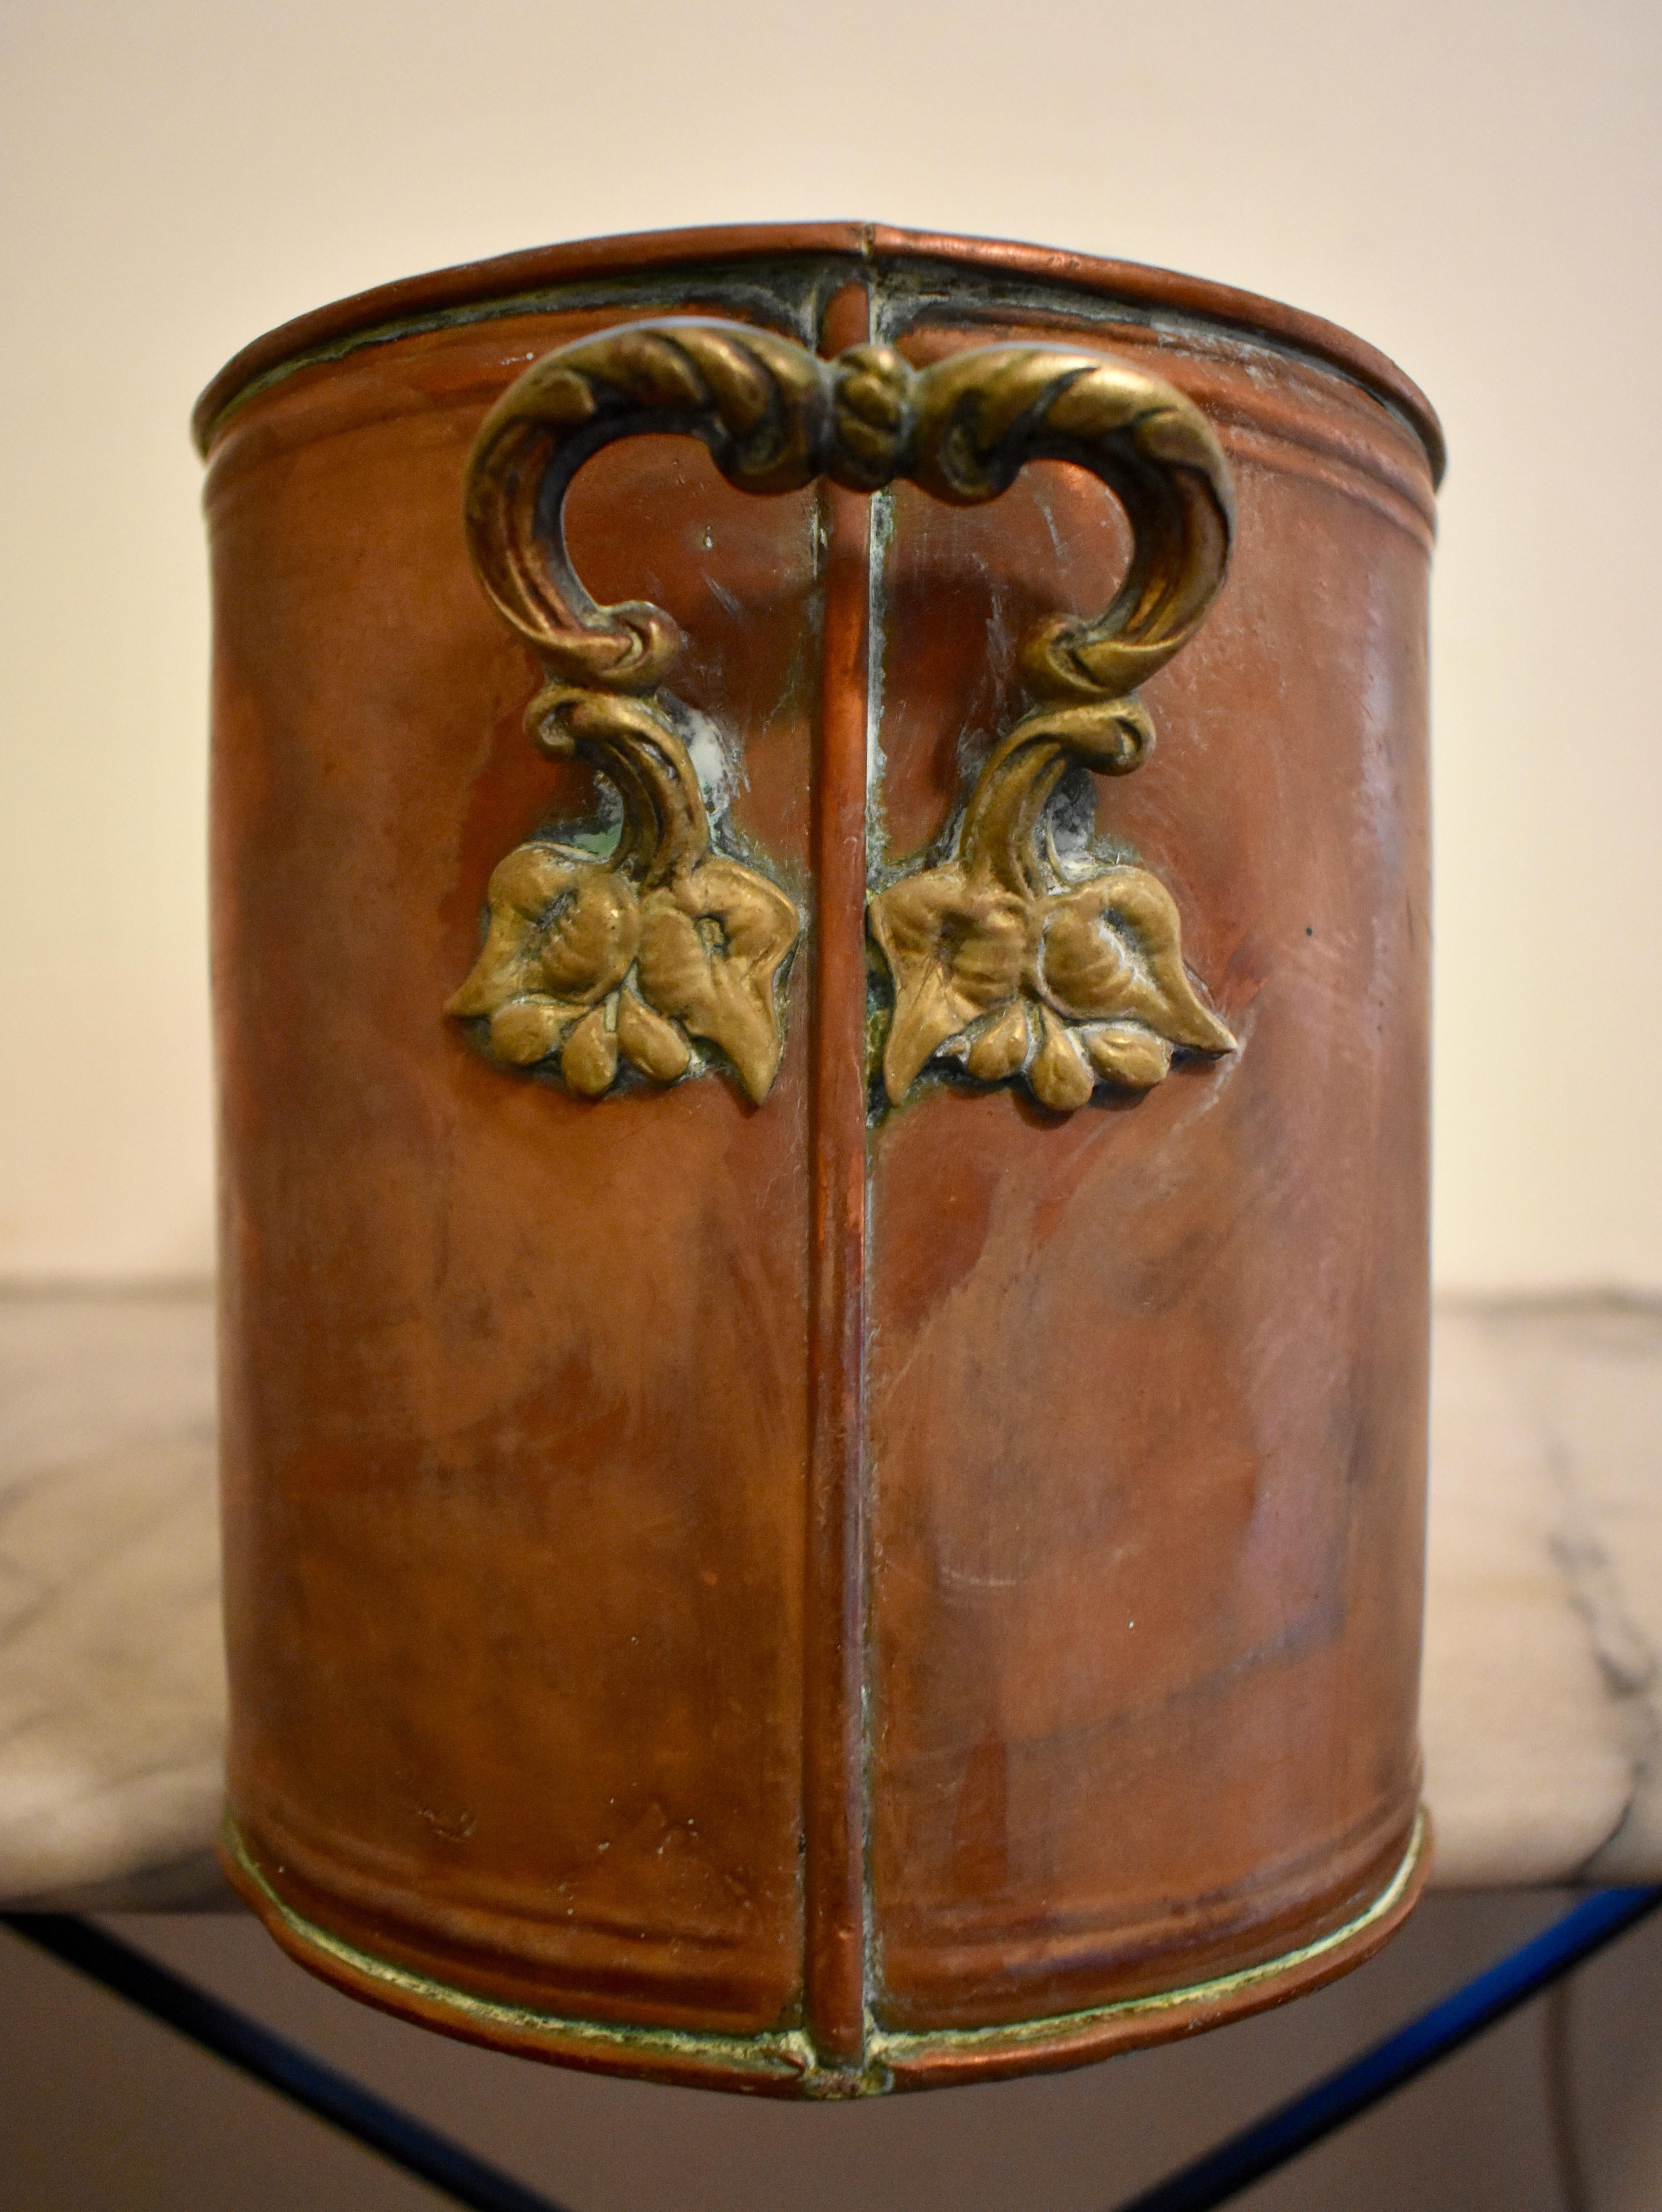 Metalwork Rustic Country French Copper & Brass Handled Potted Plant Jardinière, circa 1900